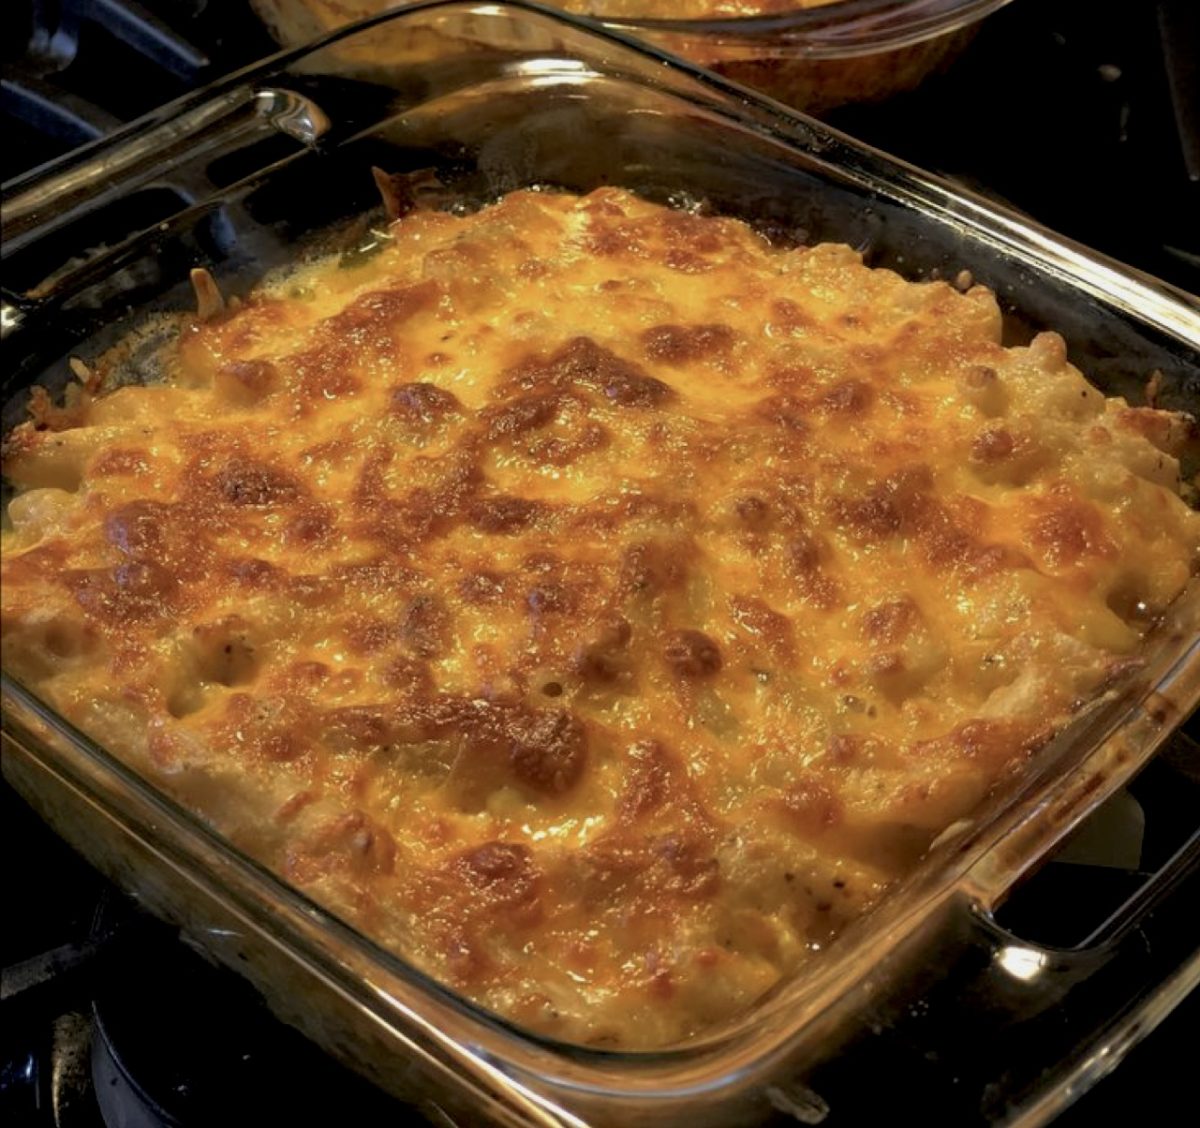 Gab-stronomys recipe of the month: Mac n Cheese